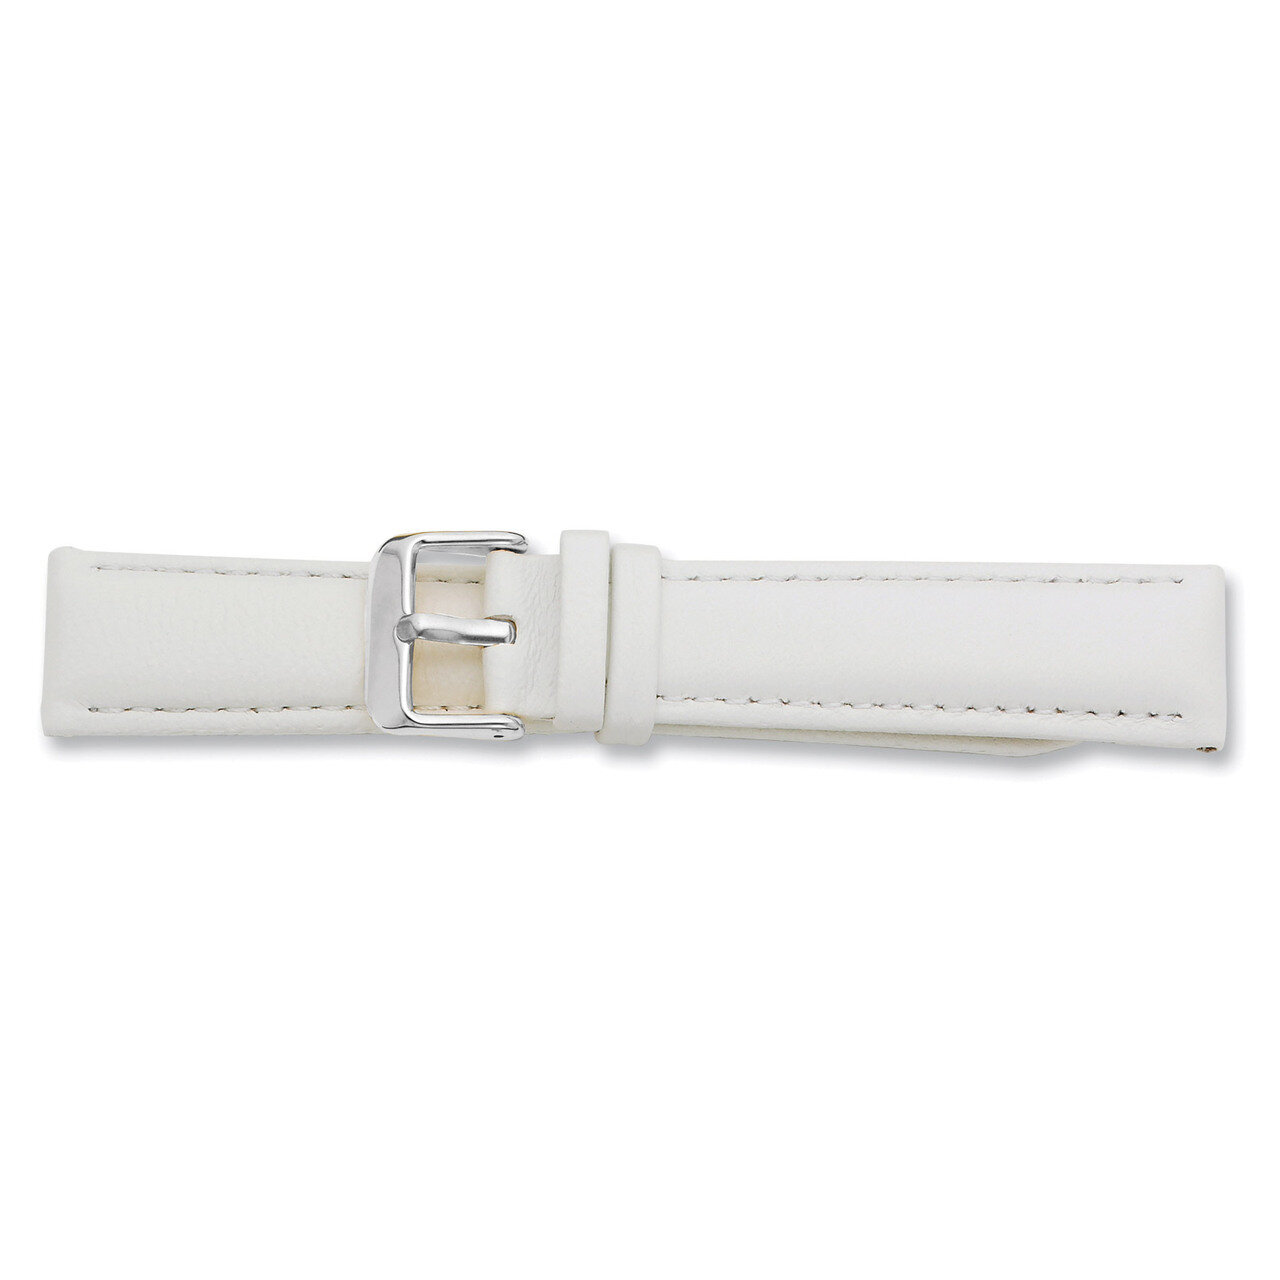 14mm White Glove Leather Watch Band 6.75 Inch Silver-tone Buckle BAW197-14